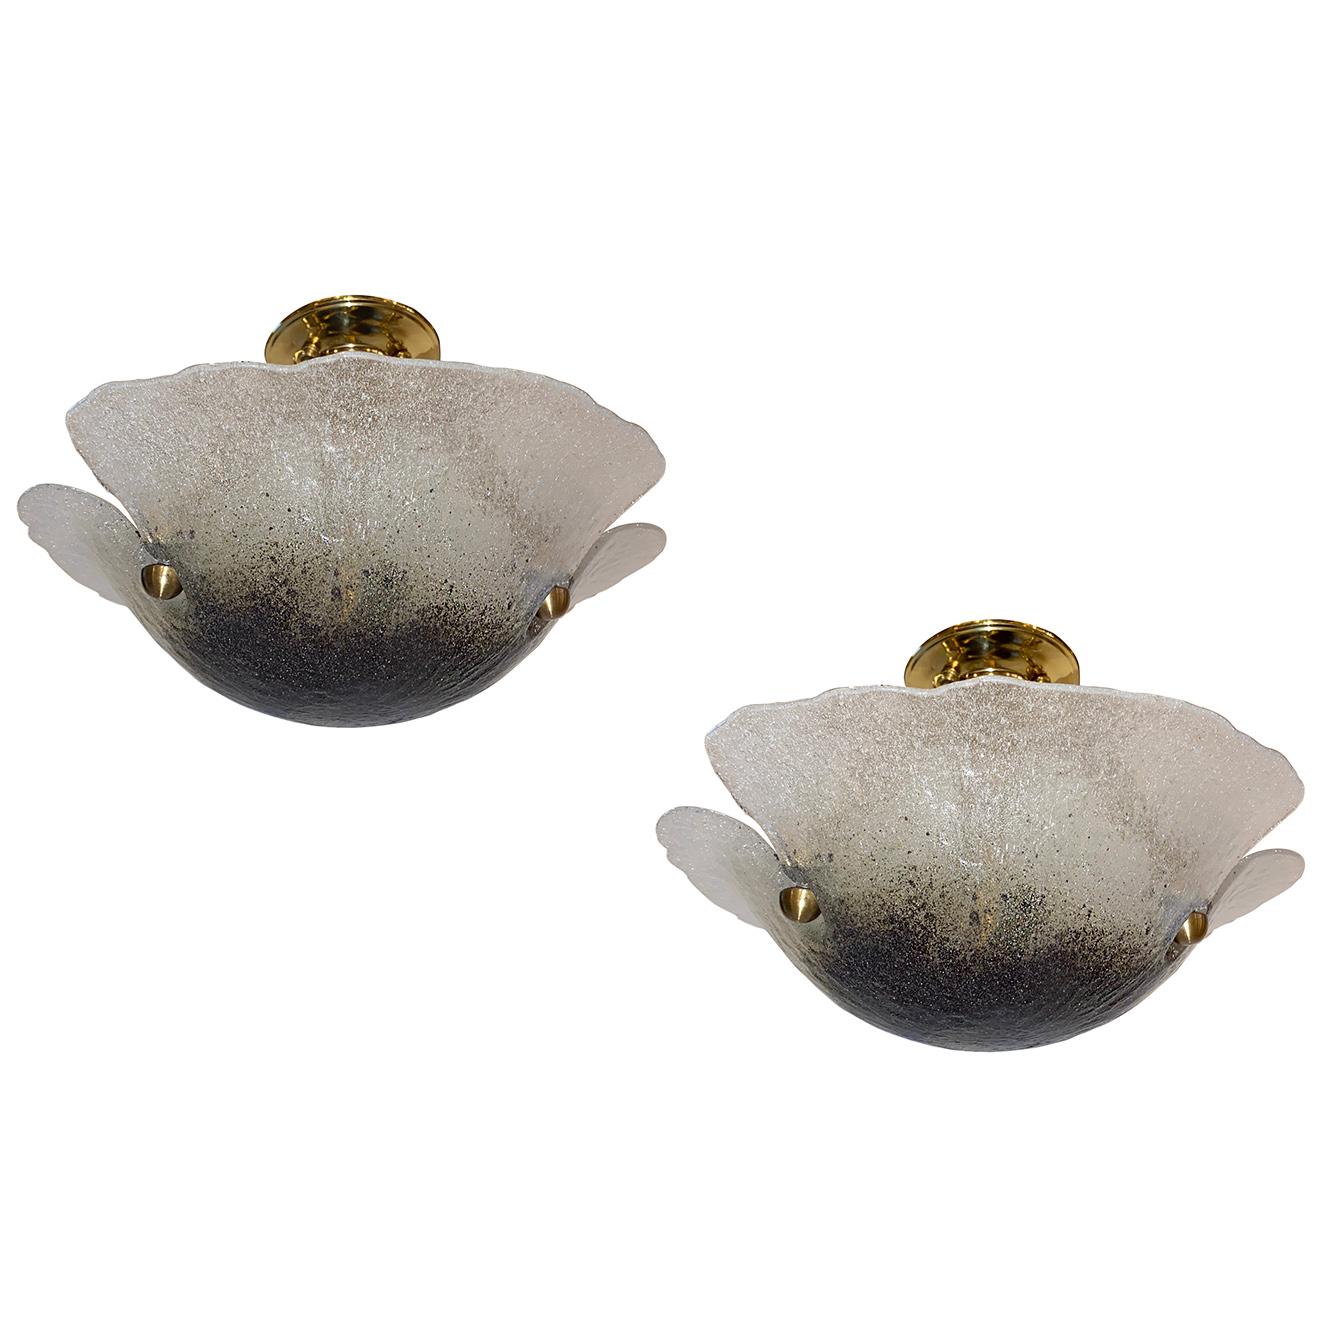 Pair of circa 1960's Italian molded glass light fixtures with gilt hardware. Sold individually

Measurements:
Diameter: 16.5